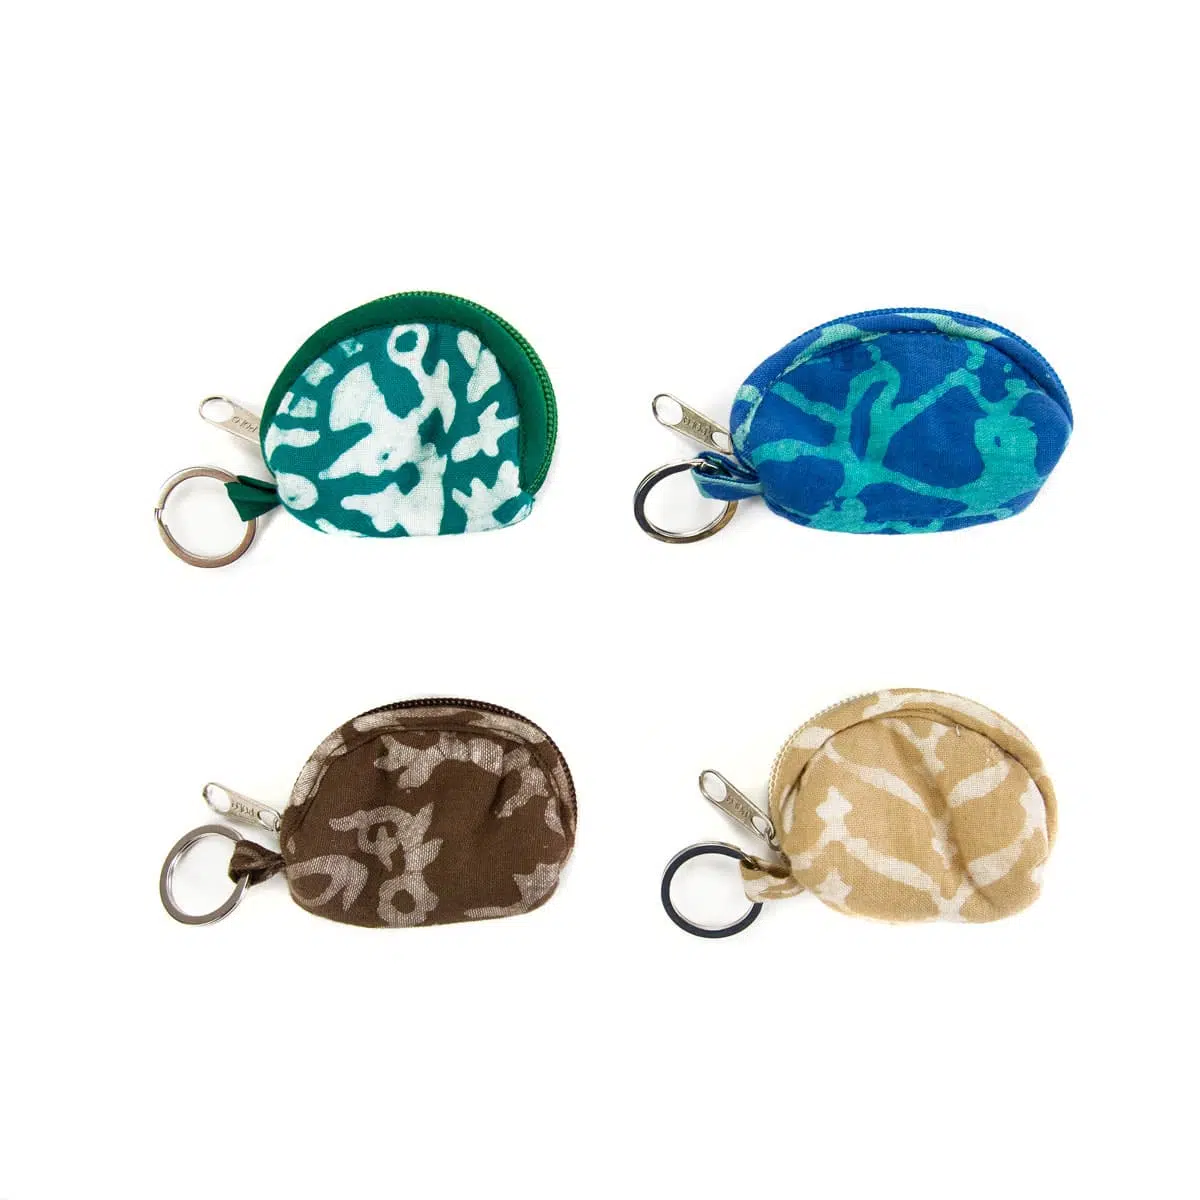 group of four cotton purse keychain, the colors for these four key chains are blue, green,blue,brown,tan